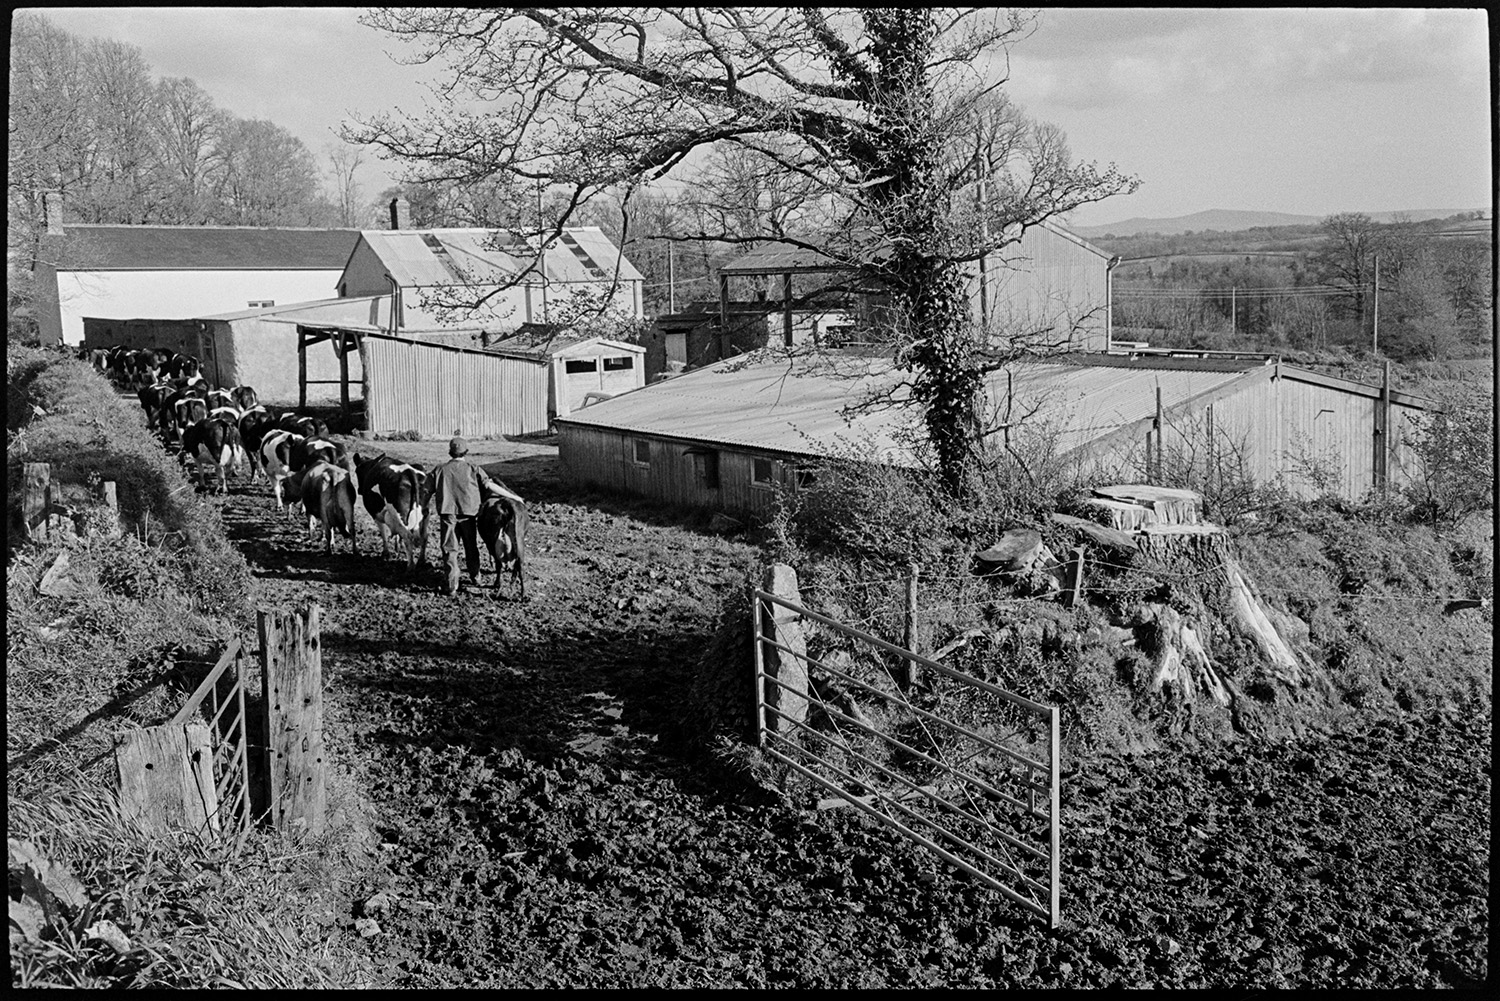 Cows, milking herd with elm trunks in field. 
[A man herding dairy cattle into a farmyard, along a muddy track, to be milked at Parsonage, Iddesleigh. Farm buildings, including barns can be seen in the background. Tree stumps and an open field gate are visible in the foreground.]